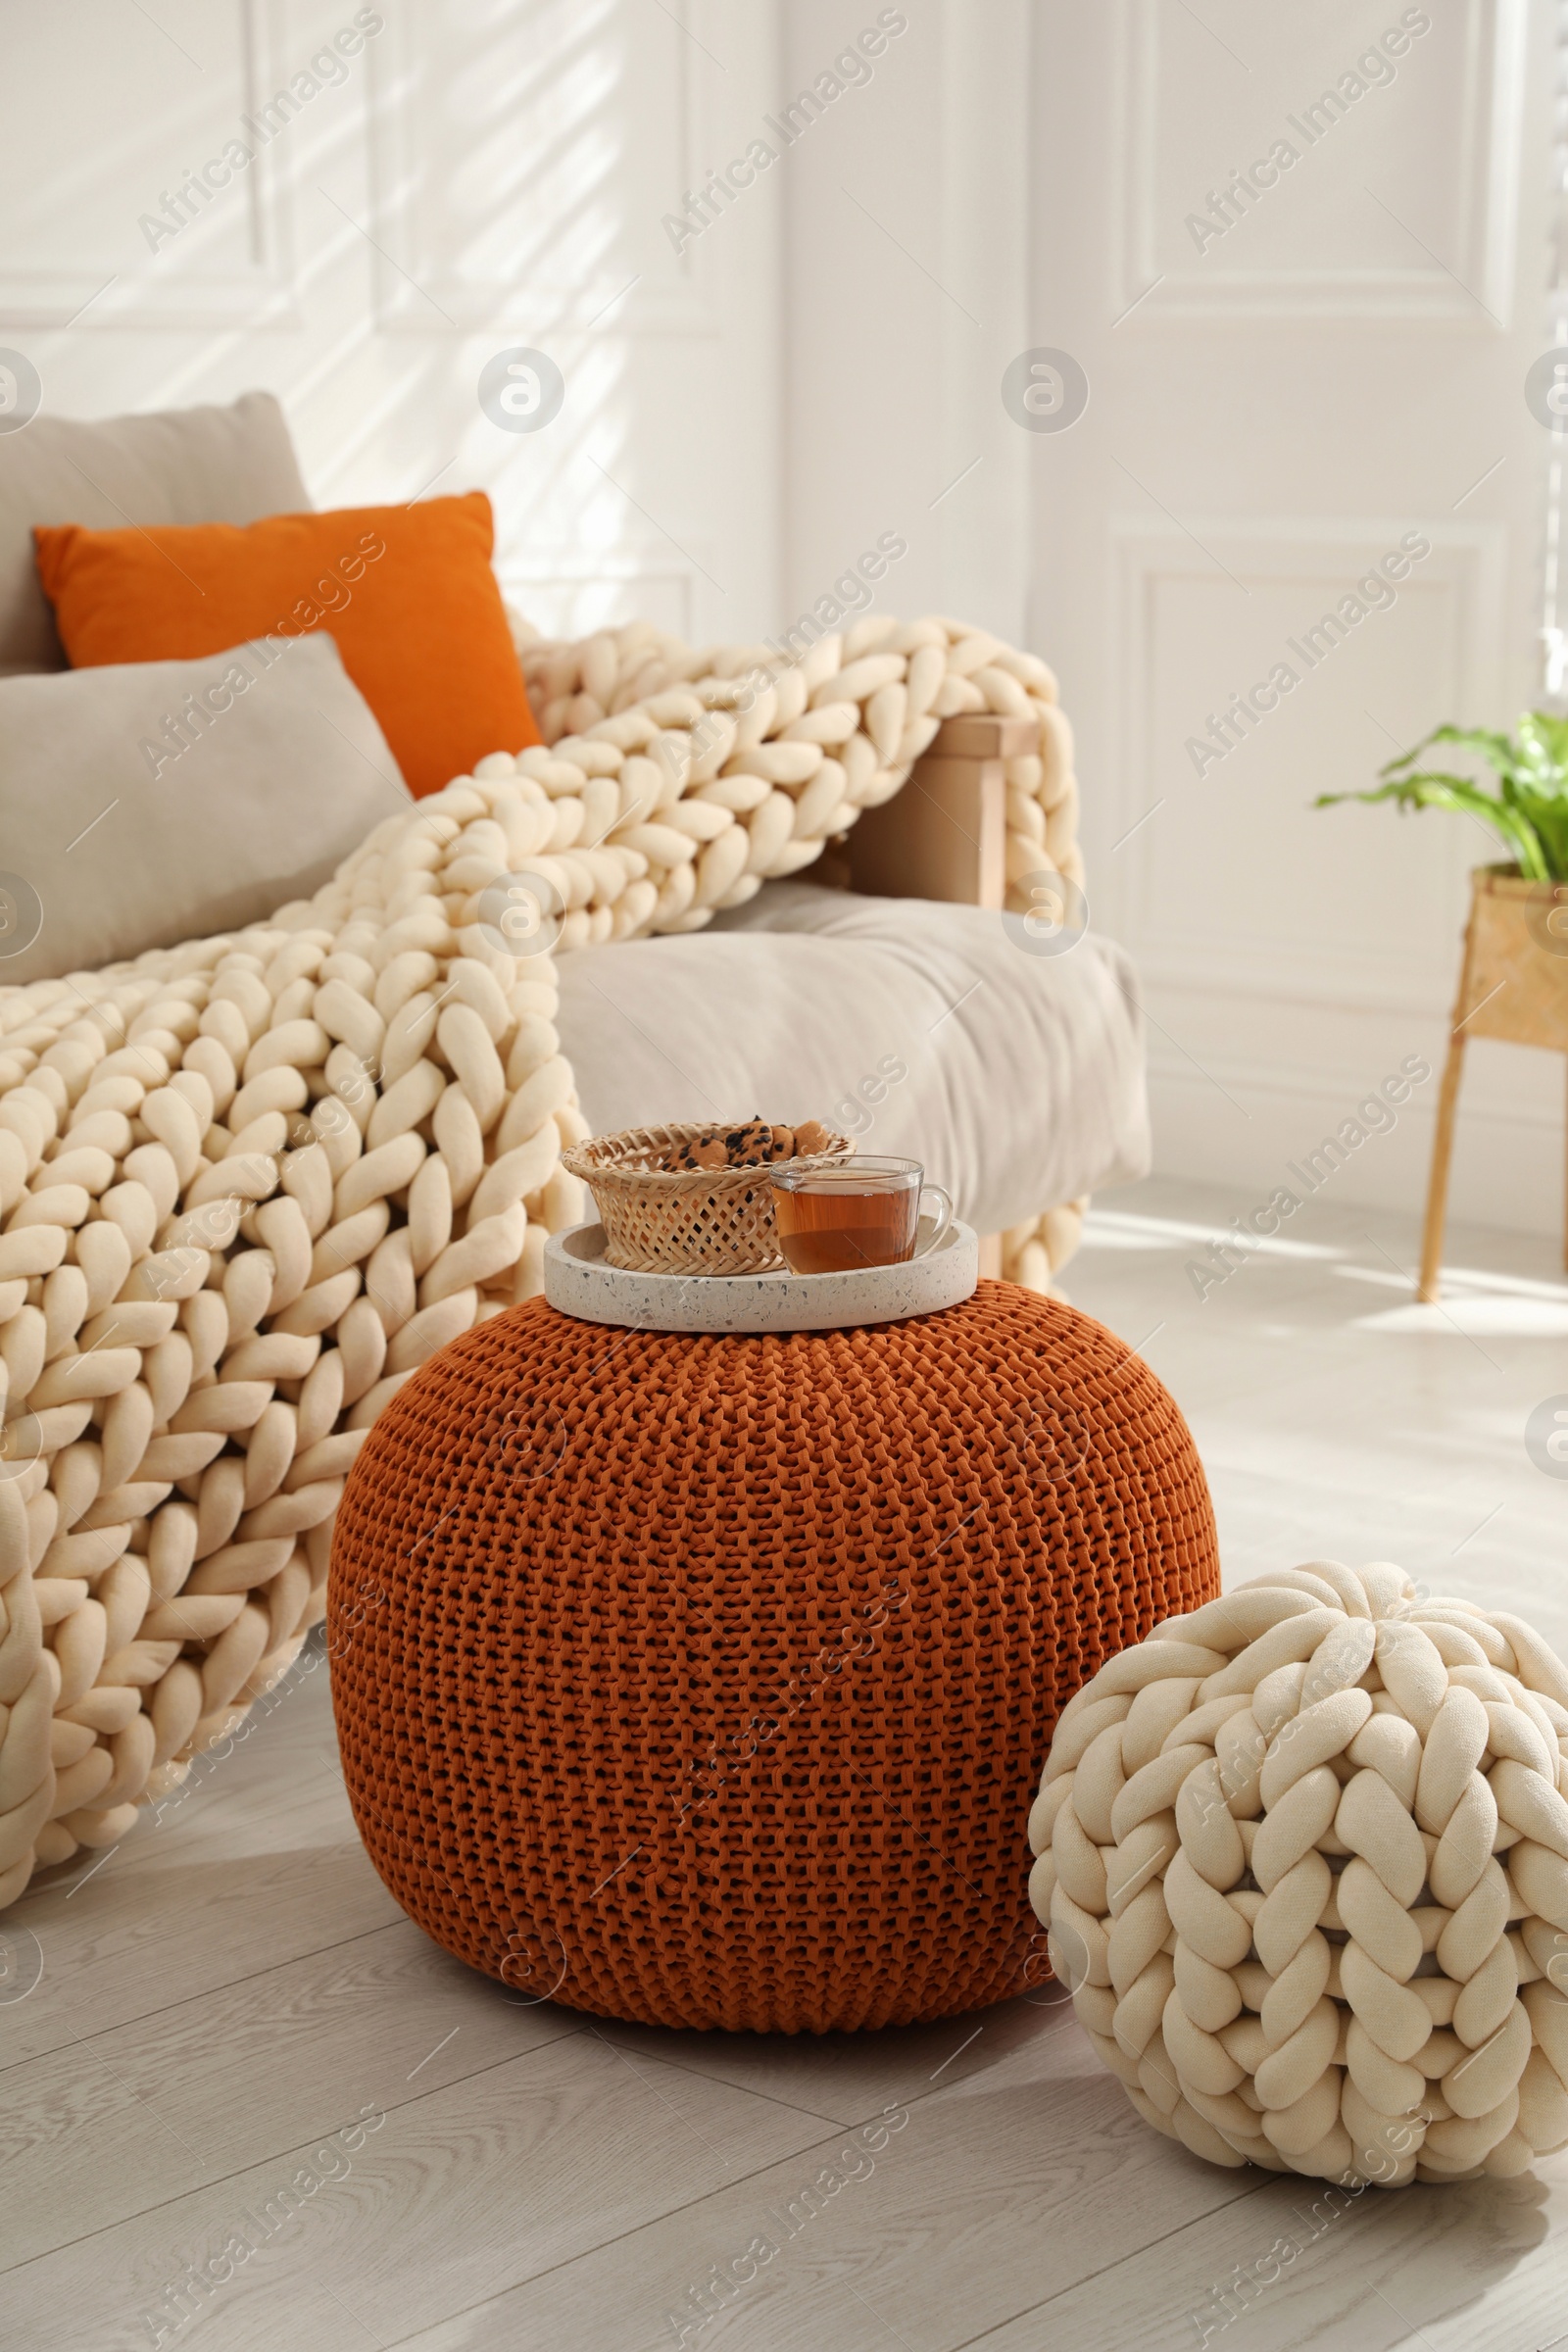 Photo of Tray with cup of tea and cookies on stylish comfortable pouf in room. Home design